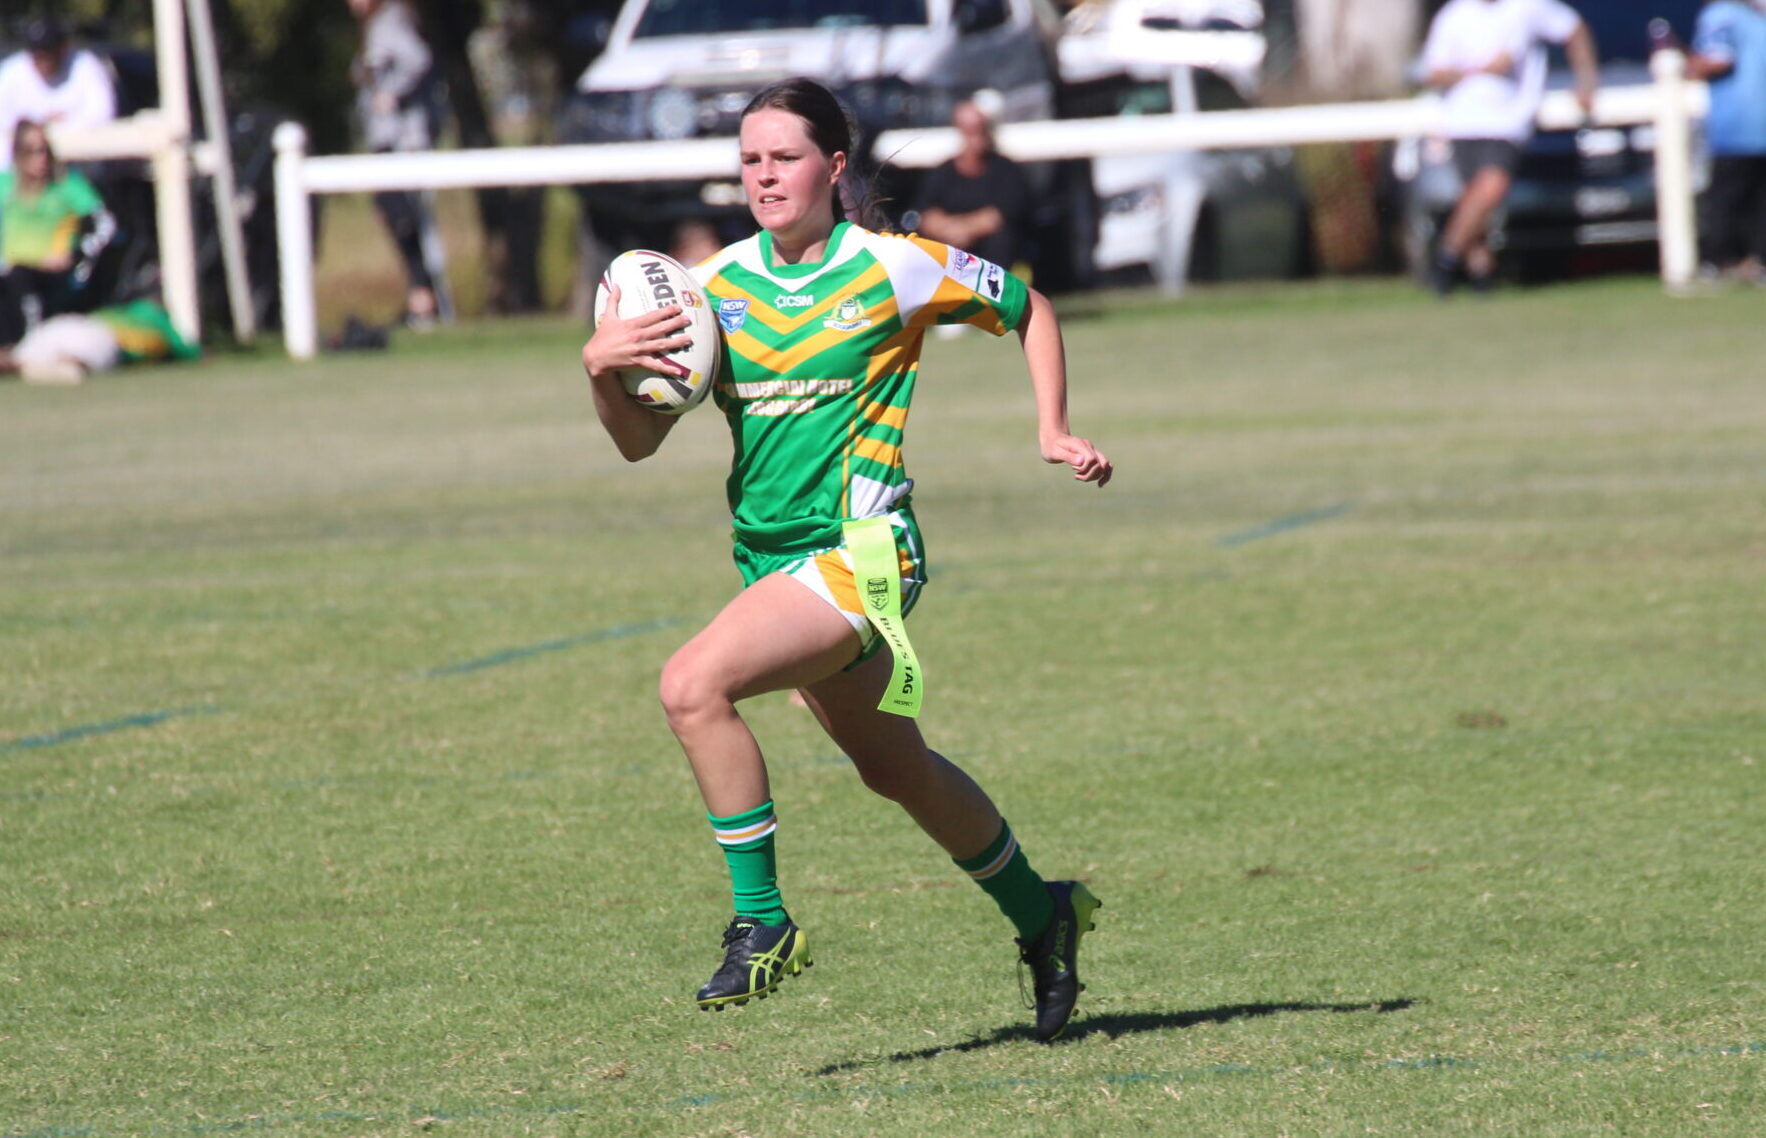 Roos’ league tag team extends its unbeaten run to four matches